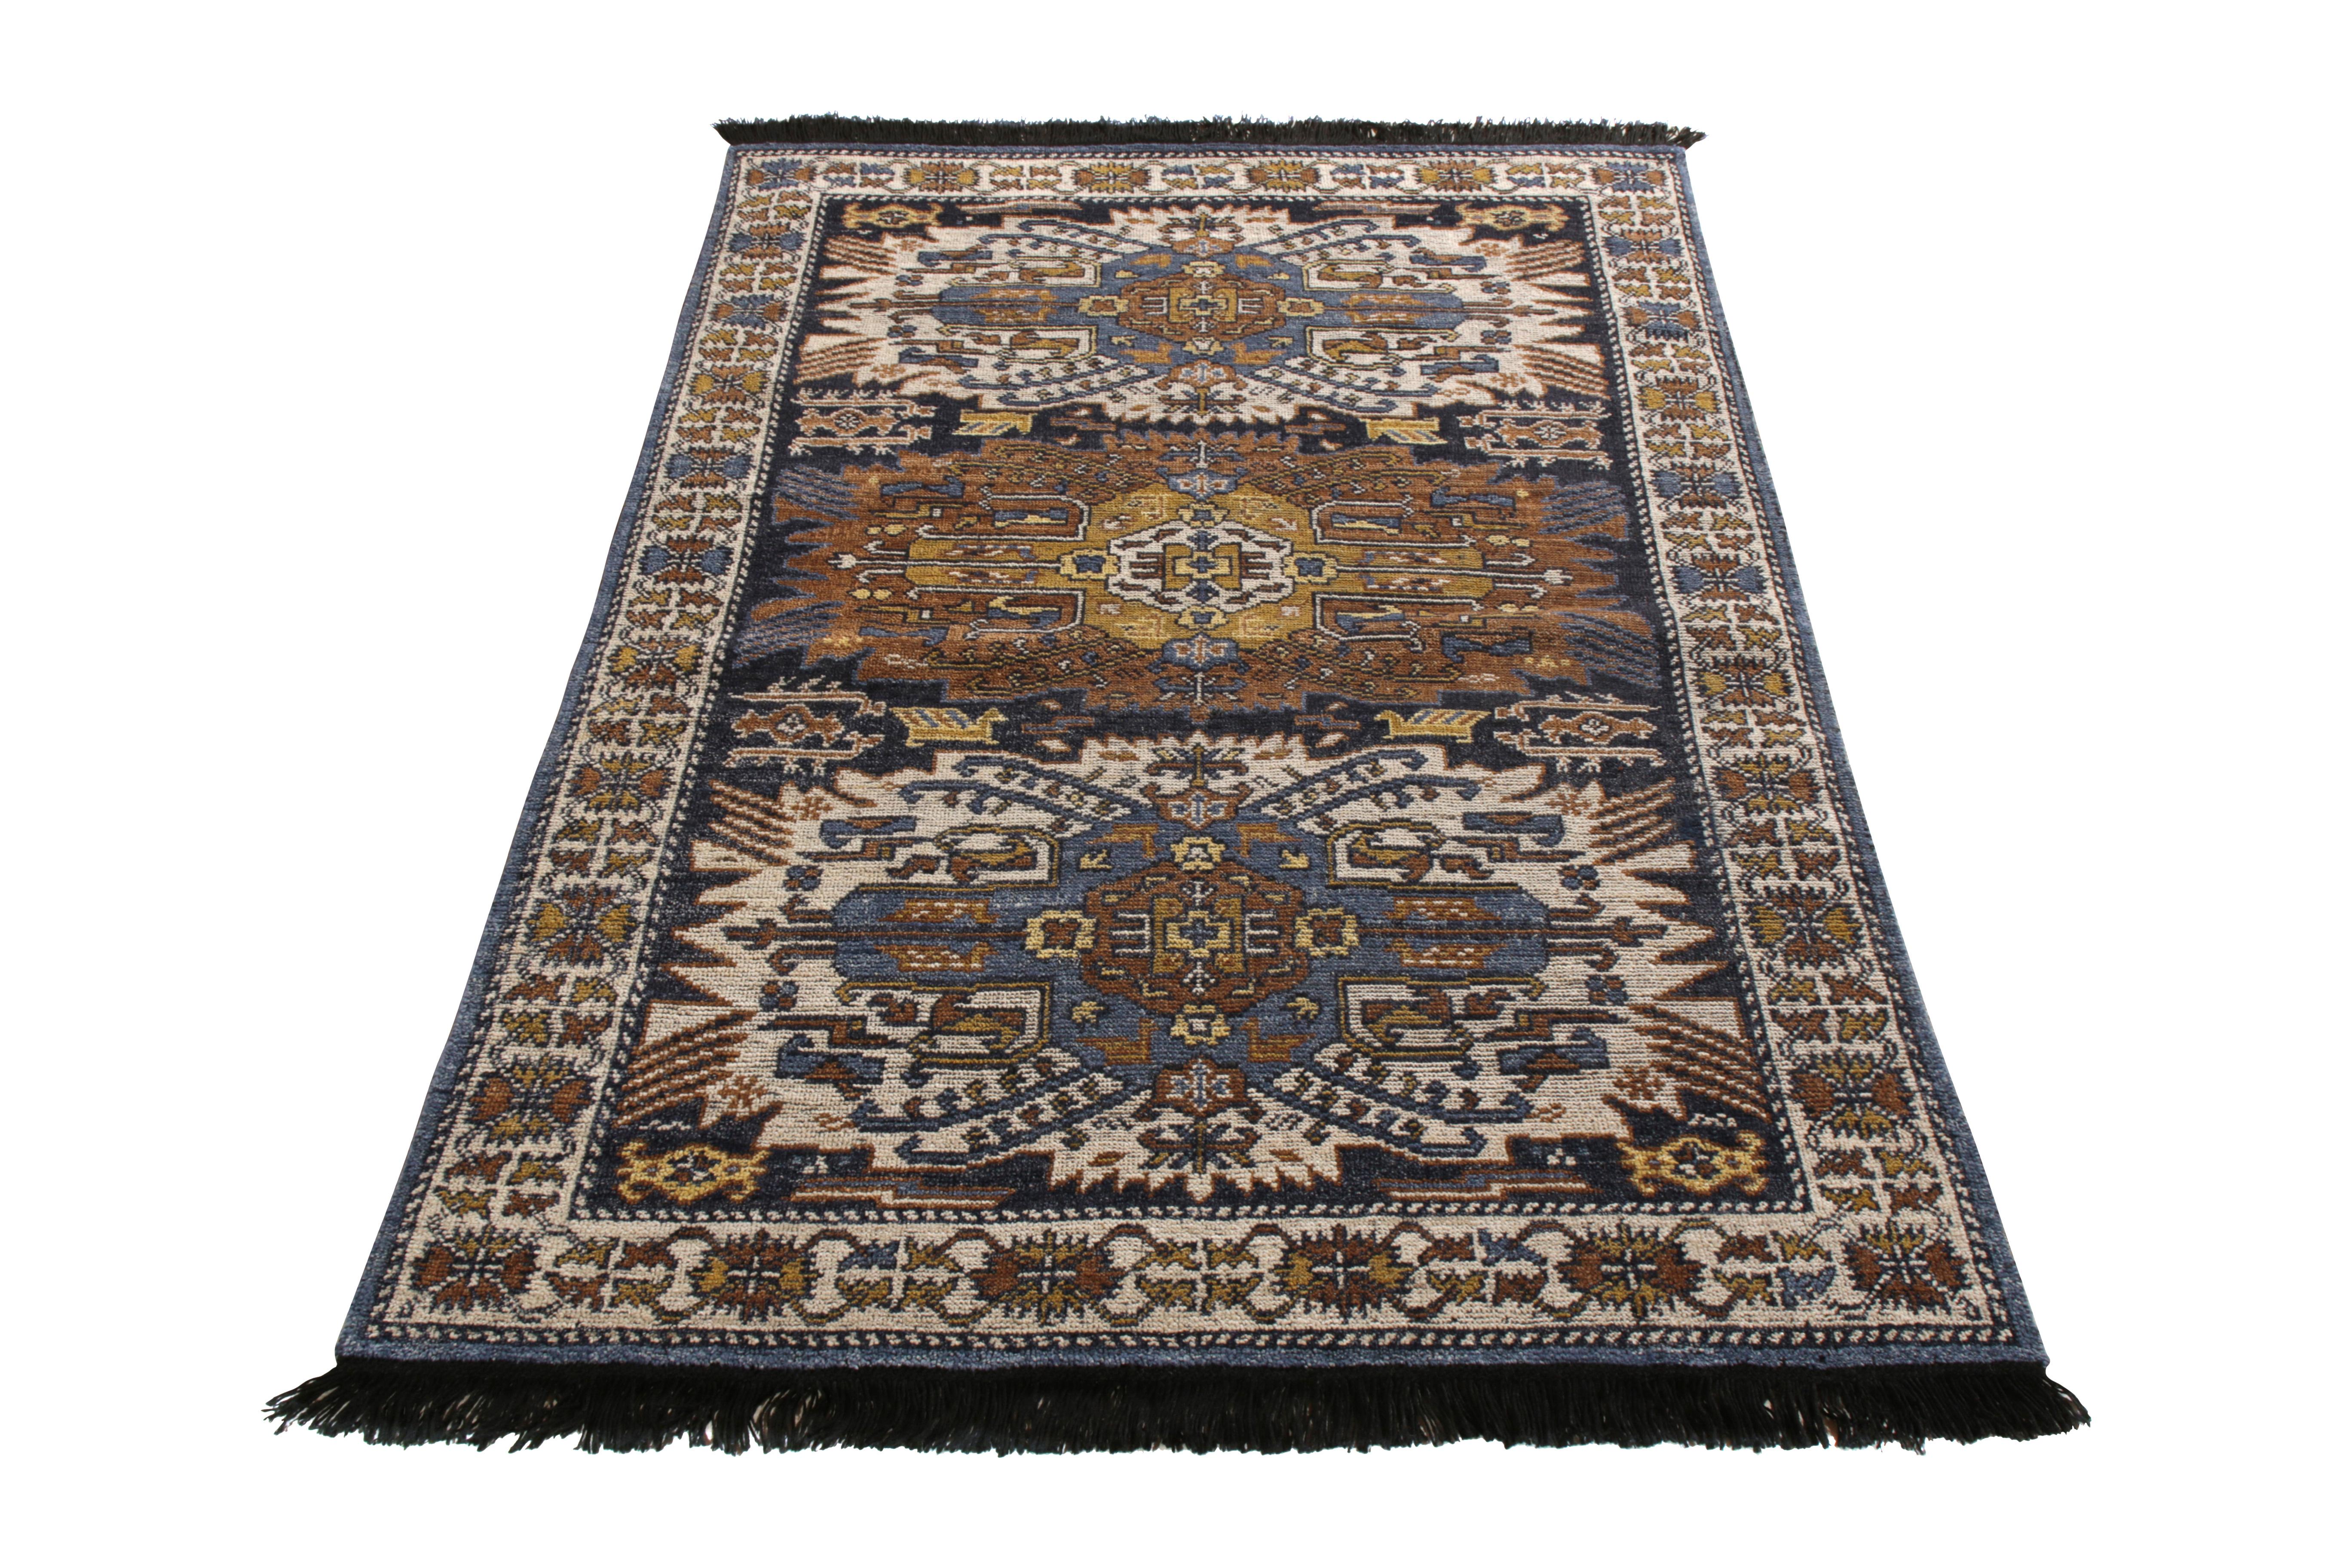 A 4x6 ode to celebrated tribal rug styles, from Rug & Kilim’s Burano Collection. Hand knotted in notably soft Ghazni wool, enjoying a play of beige-brown and blue in a depthful, graphic all over geometric pattern. A tasteful, versatile-sized nod to